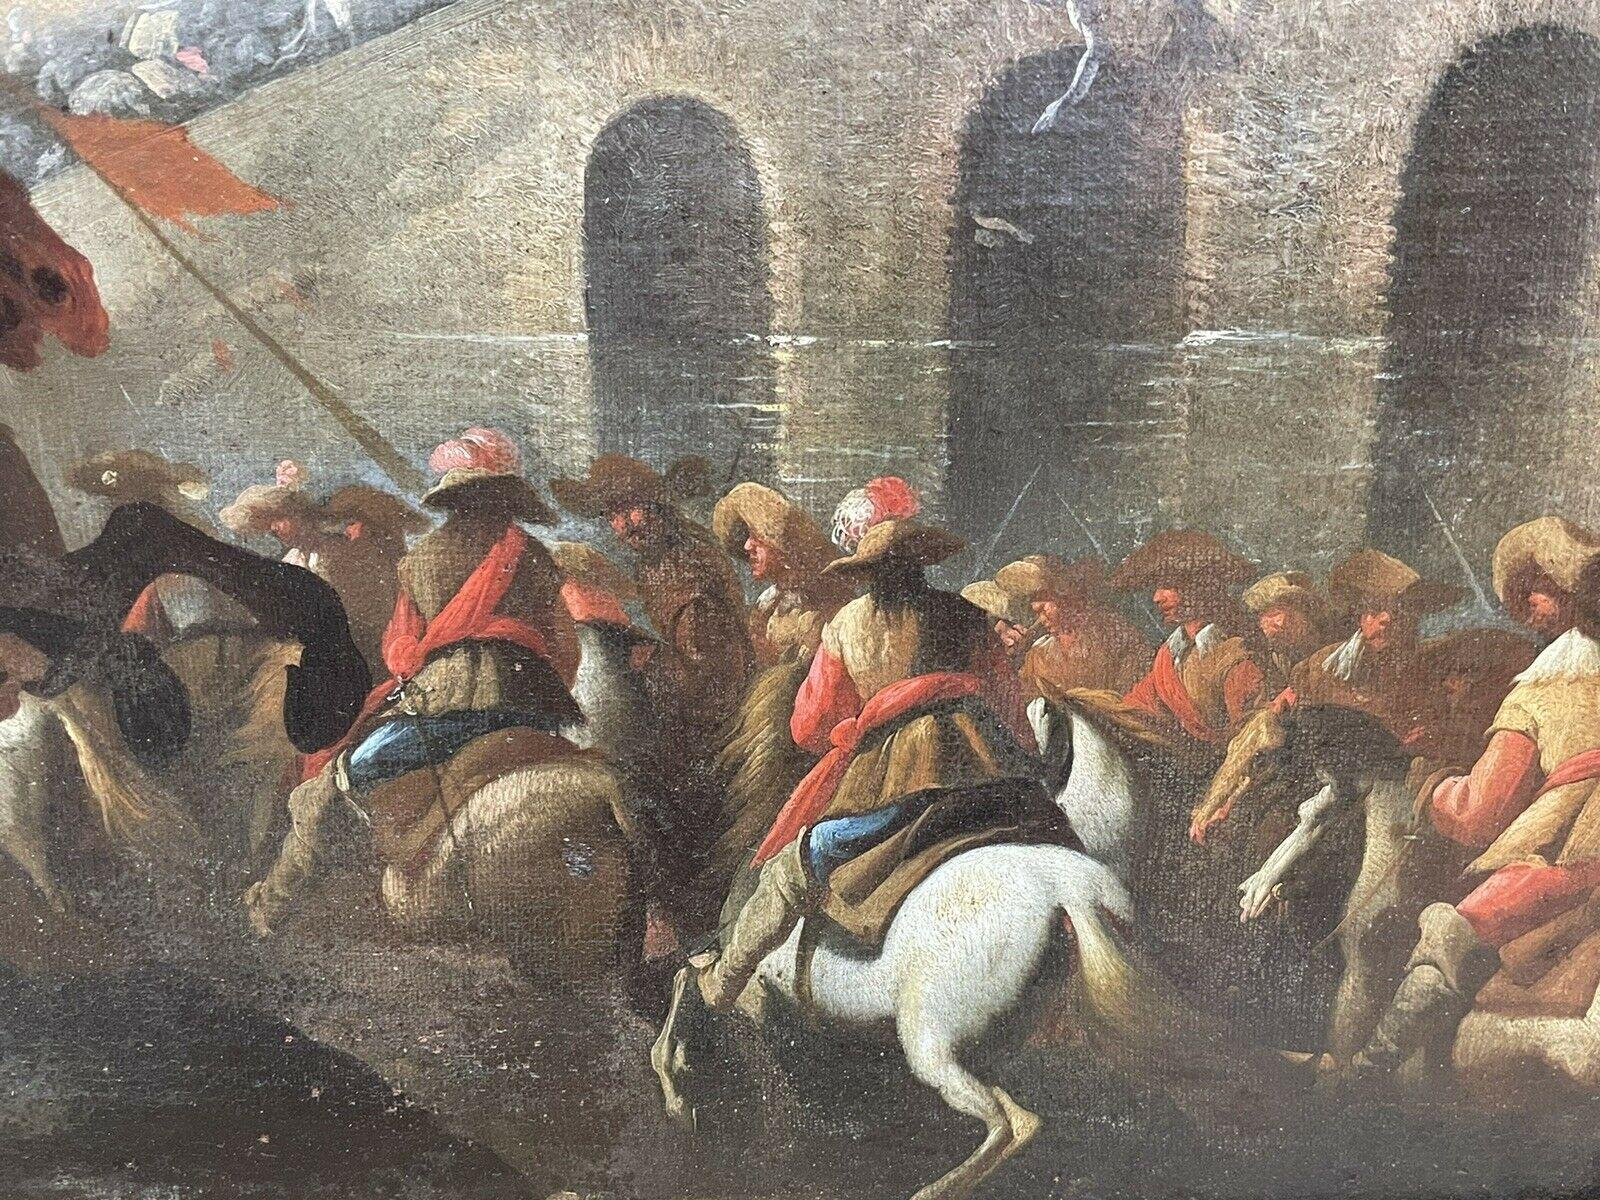 Artist/ School: French/ Italian School, 17th century, circle of Jacques Courtois (French, 1621-1675)

Very fine quality large scale 17 th century Battle Scene, from the circle of Jacques Courtois or Giacomo Cortese, called il Borgognone or le